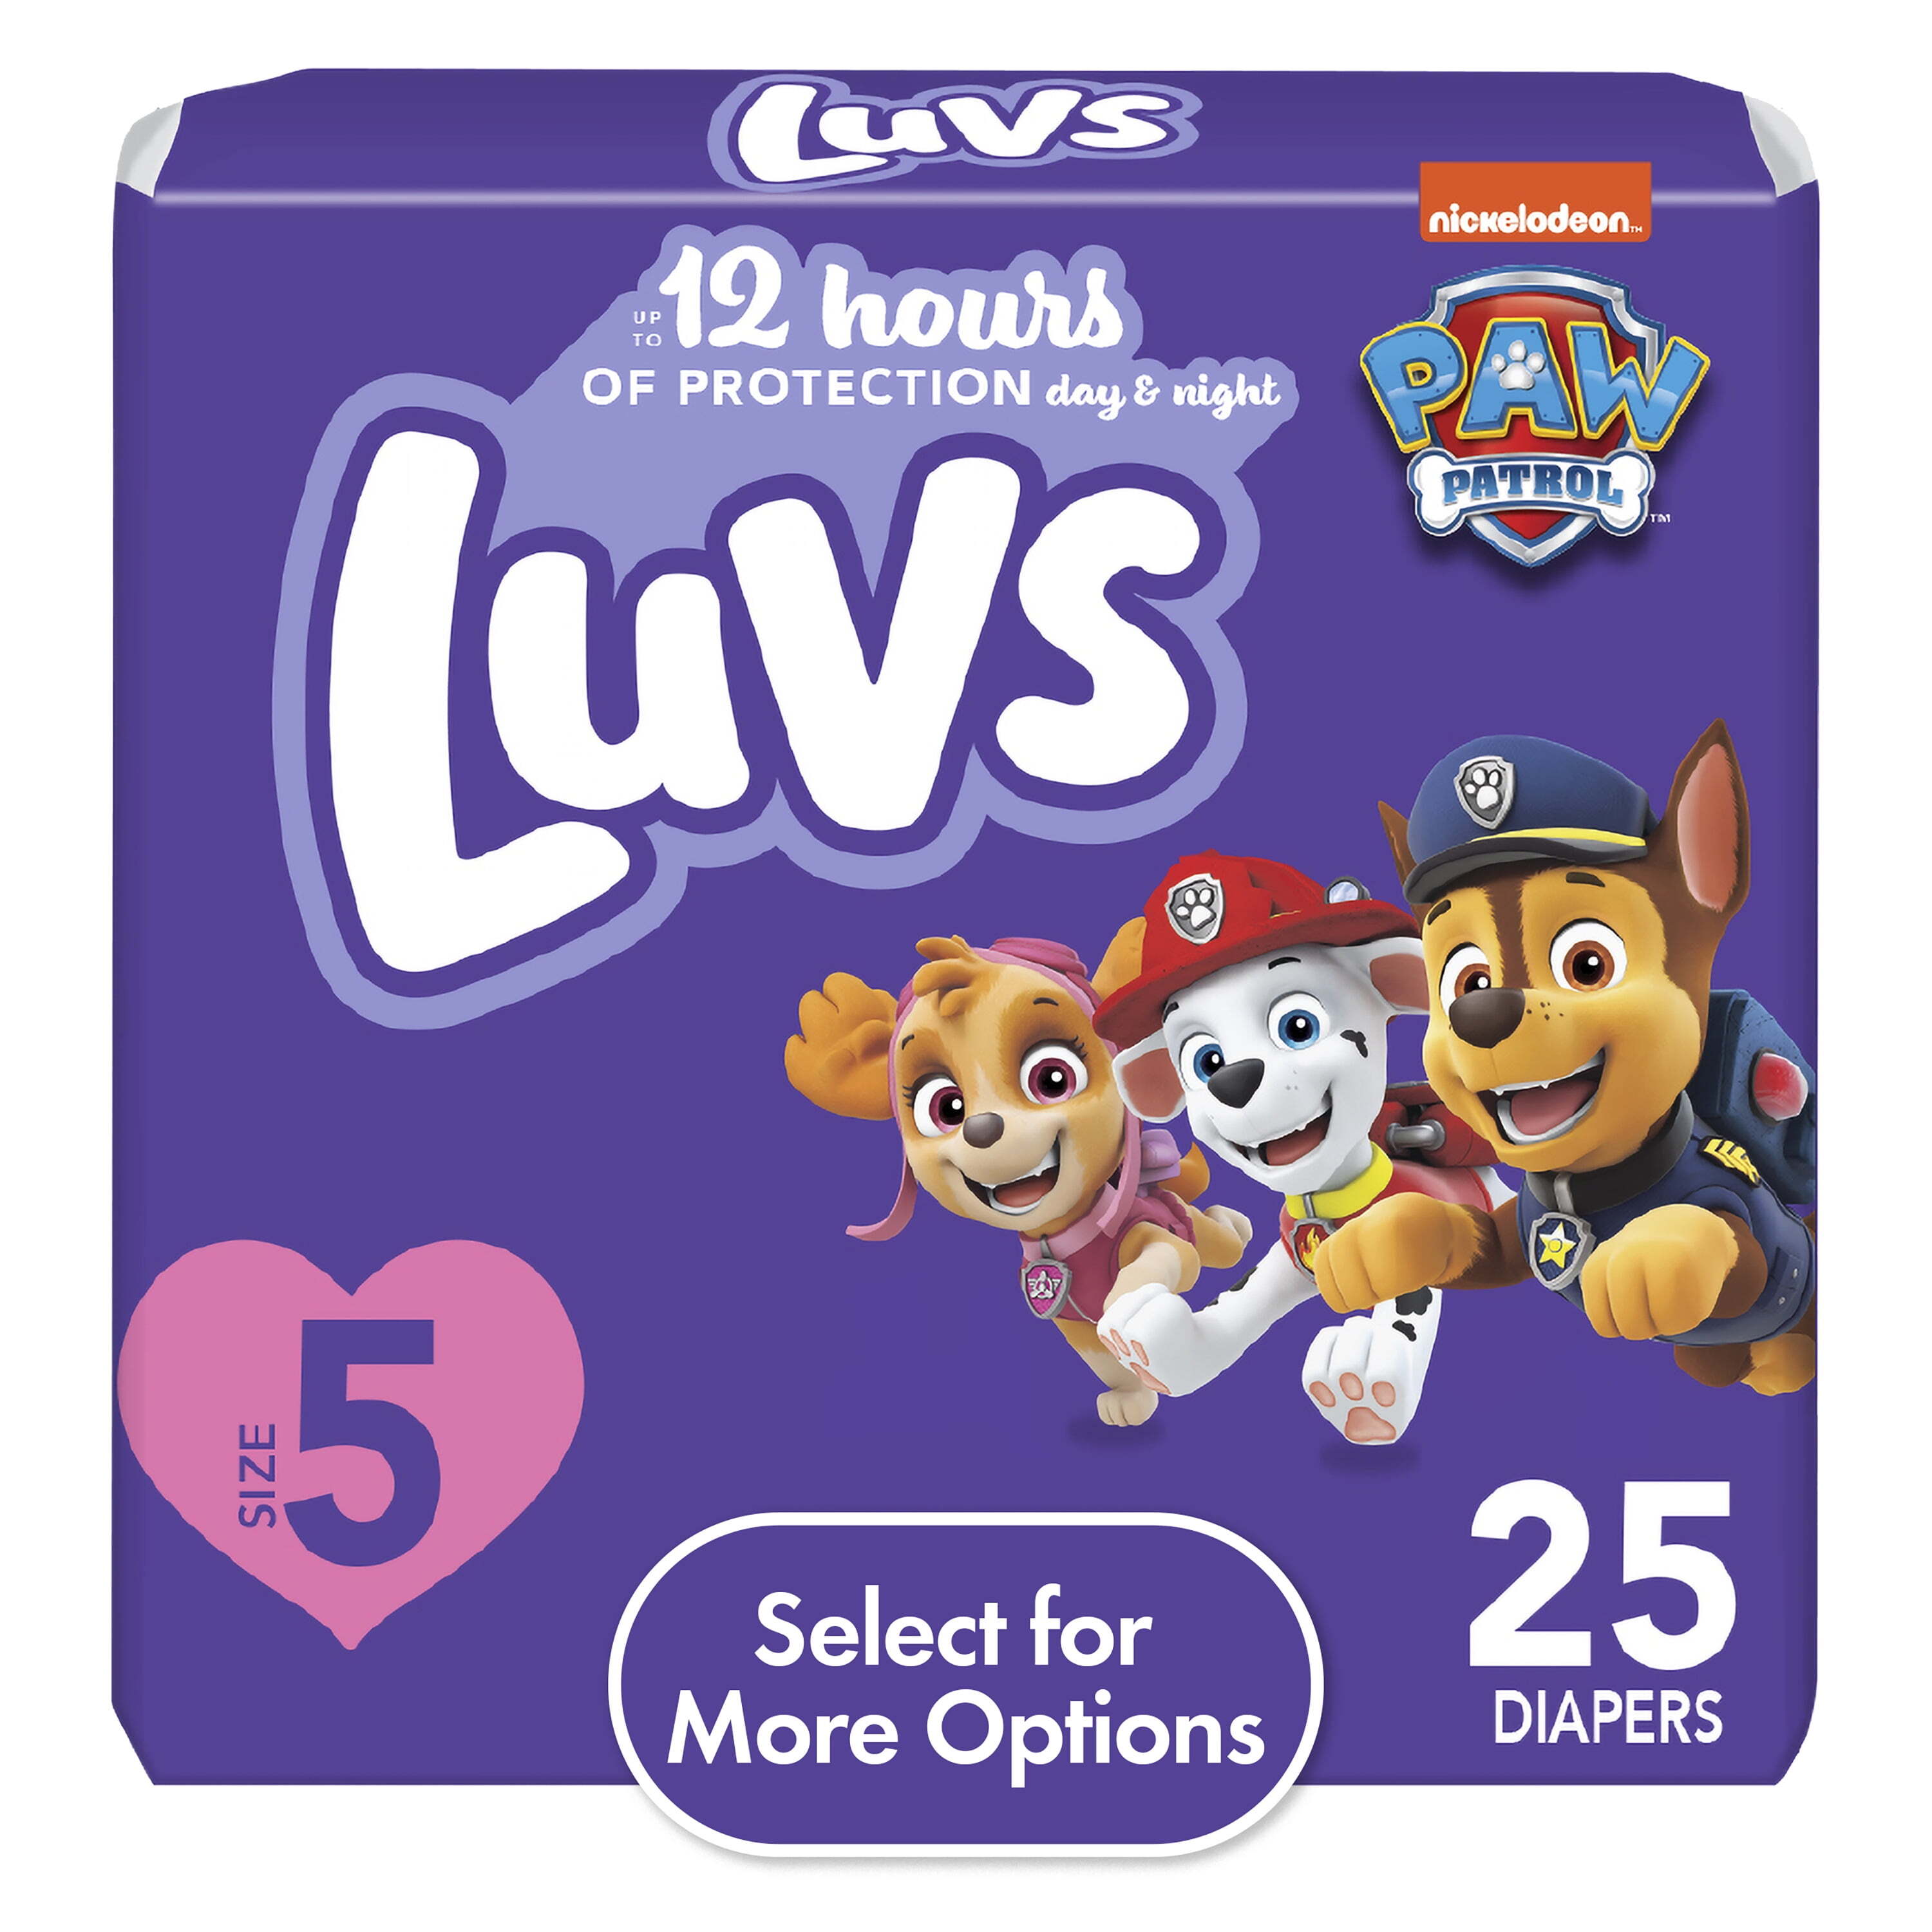 Luvs Diapers Size 5, 25 Count (Select for More Options) - image 1 of 14